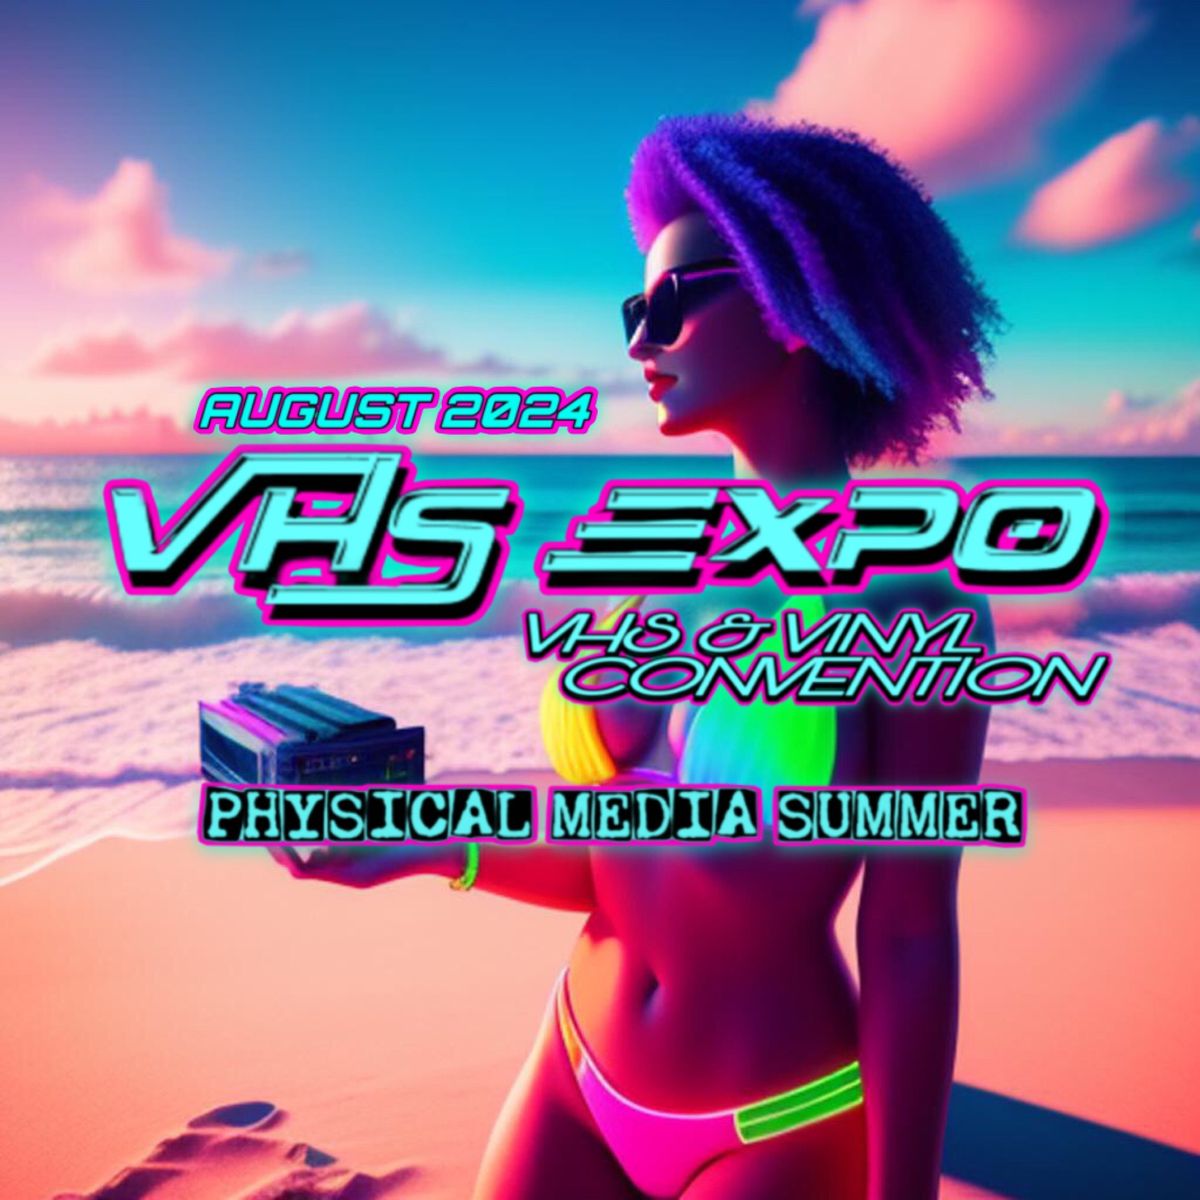 VHS EXPO: VHS & Vinyl Convention August 2024